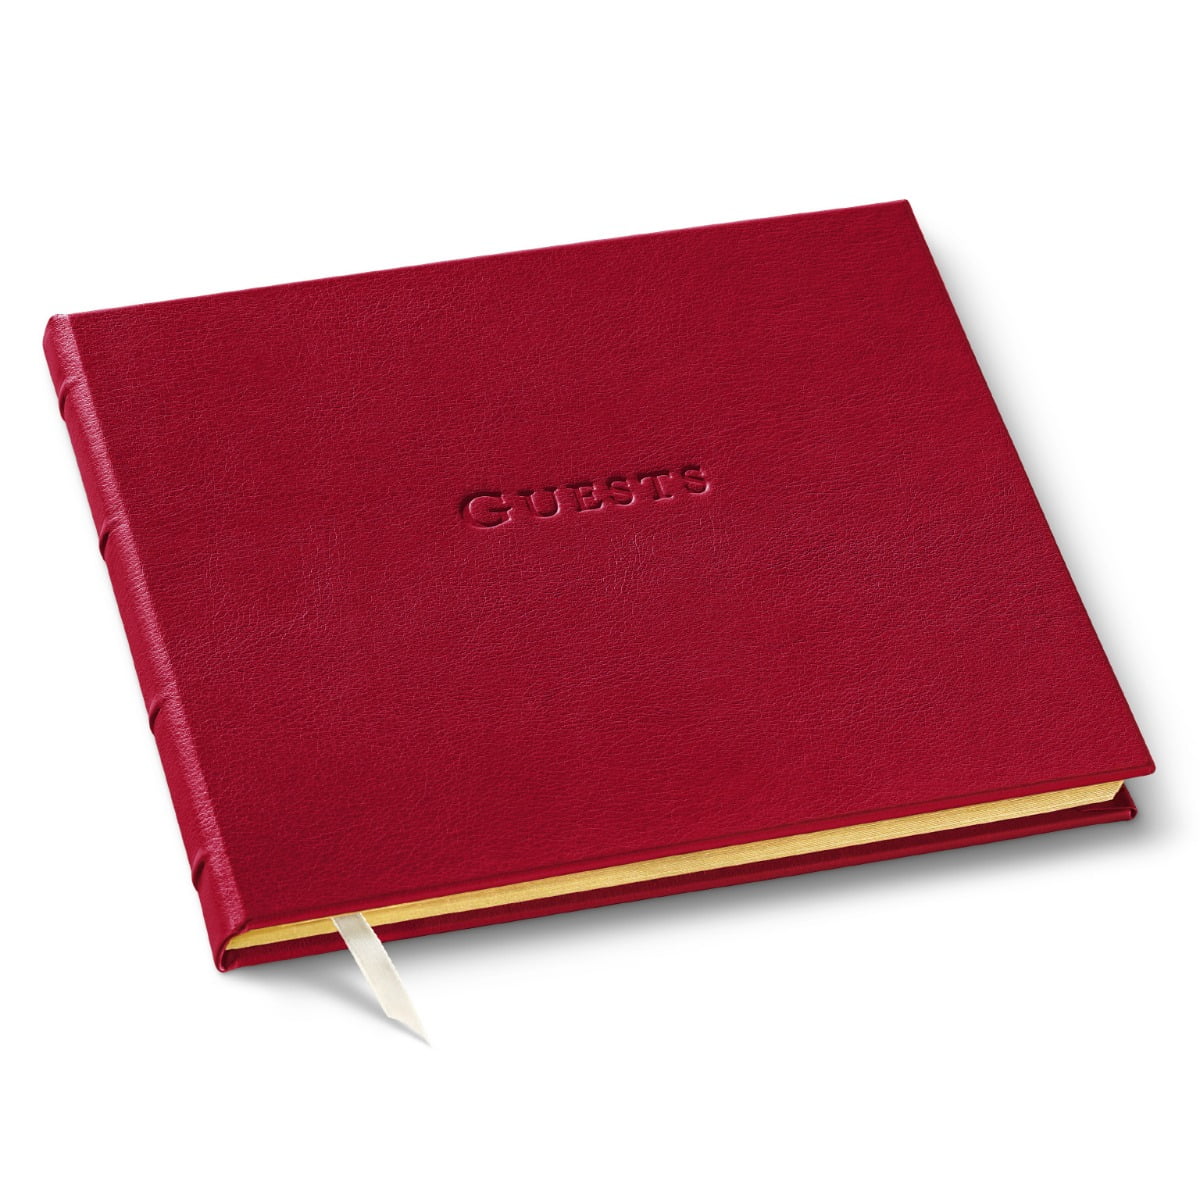 Leather Guest Book Journal by Gallery Leather, 7 x 9, 192 Gold Gilded  Ruled Horizontal Pages, Hard Cover, Ribbon Bookmarker, Acadia Deep Red 